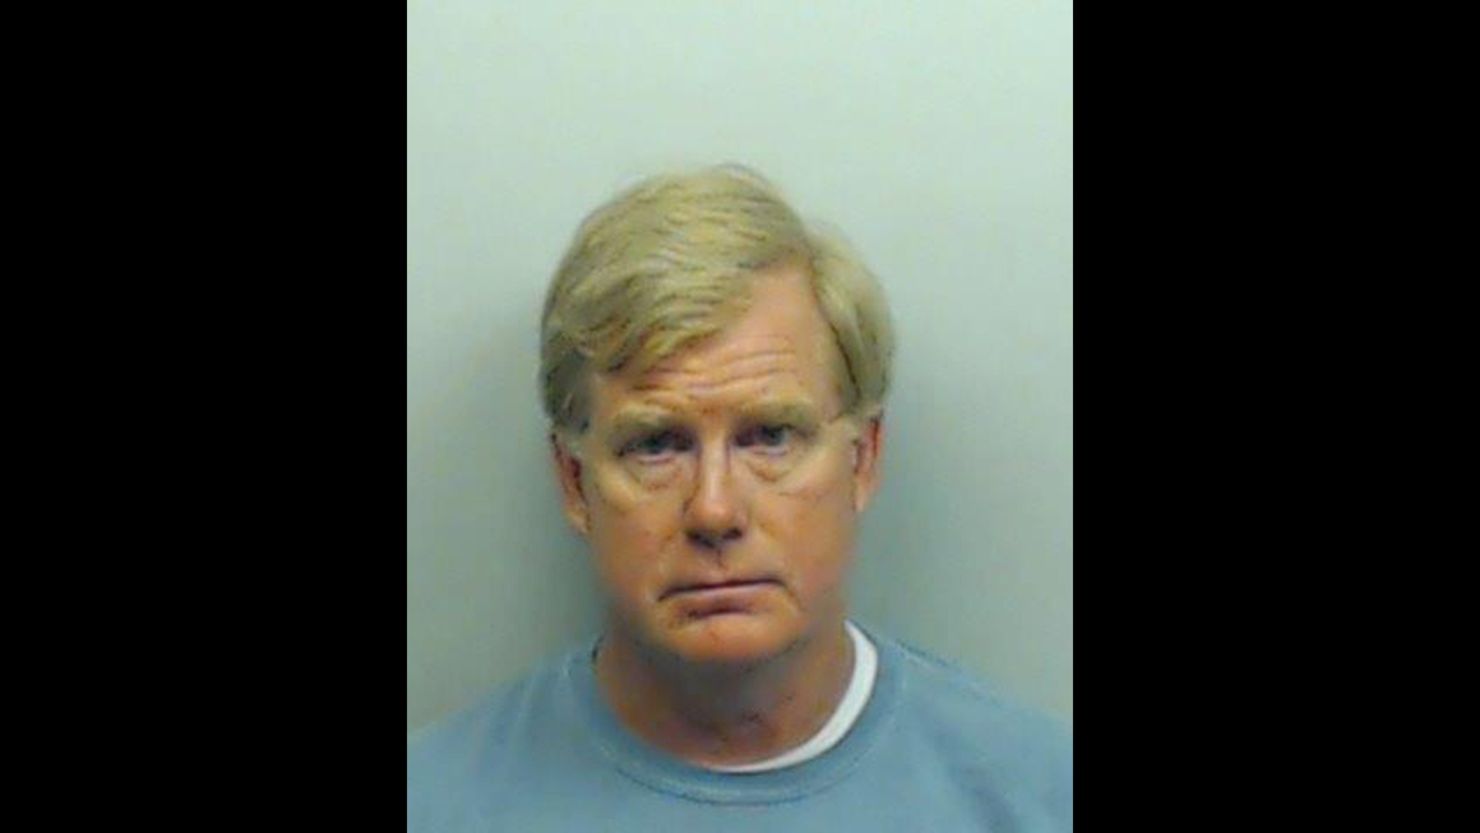 U.S. District Judge Mark Fuller was charged with a misdemeanor over the weekend.